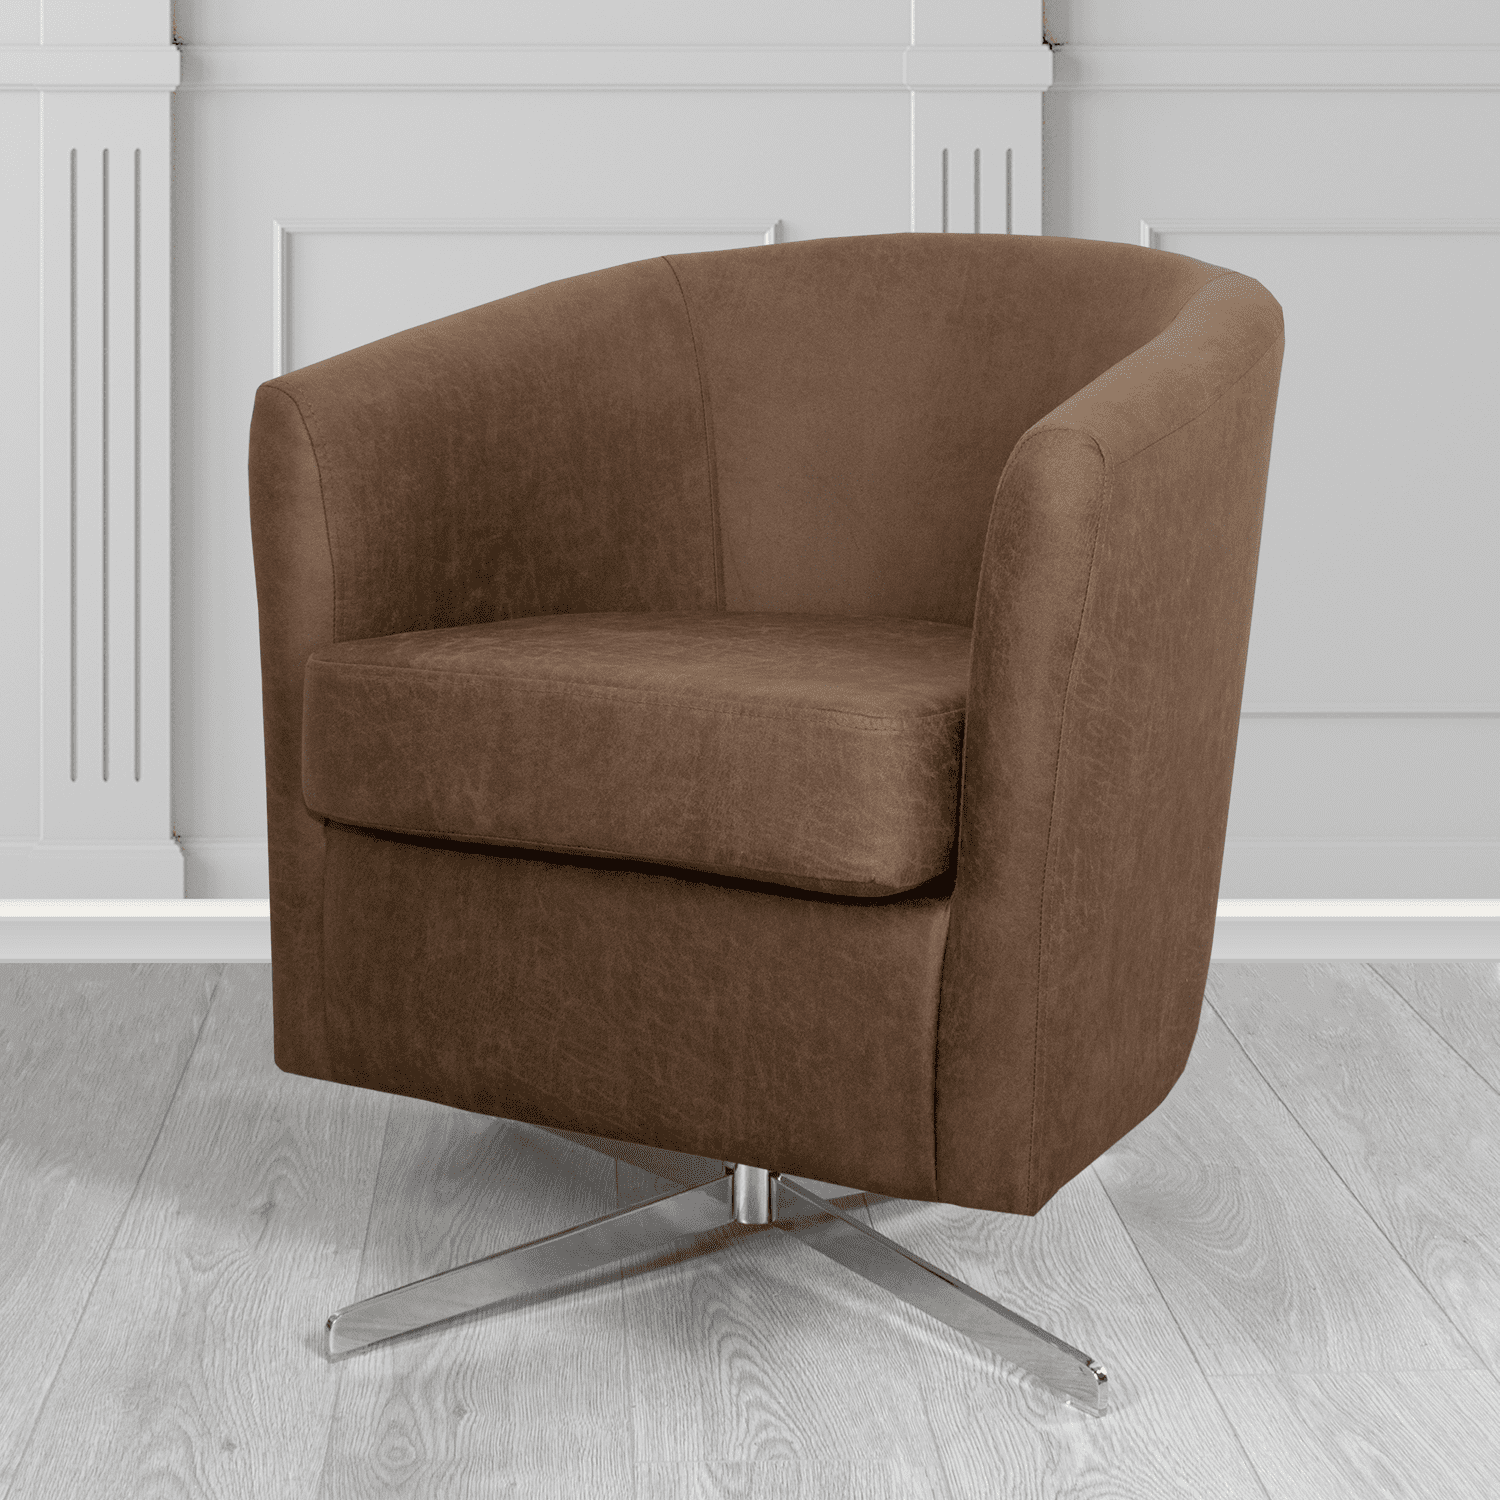 Cannes Swivel Tub Chair in Nevada Chocolate Faux Leather - The Tub Chair Shop